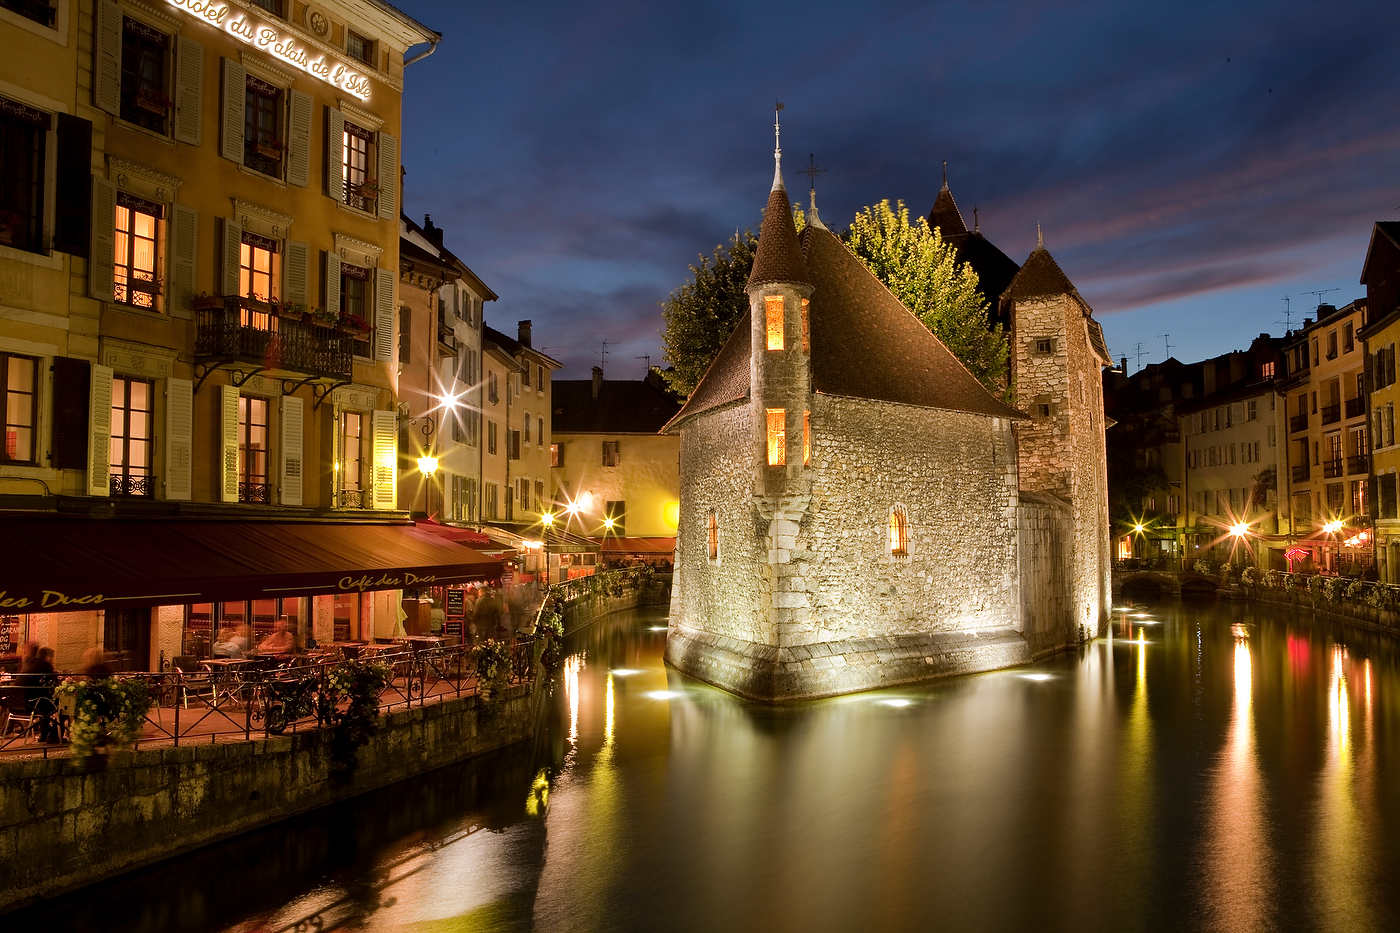 Old quarters at dusk, Annecy, French Alps.